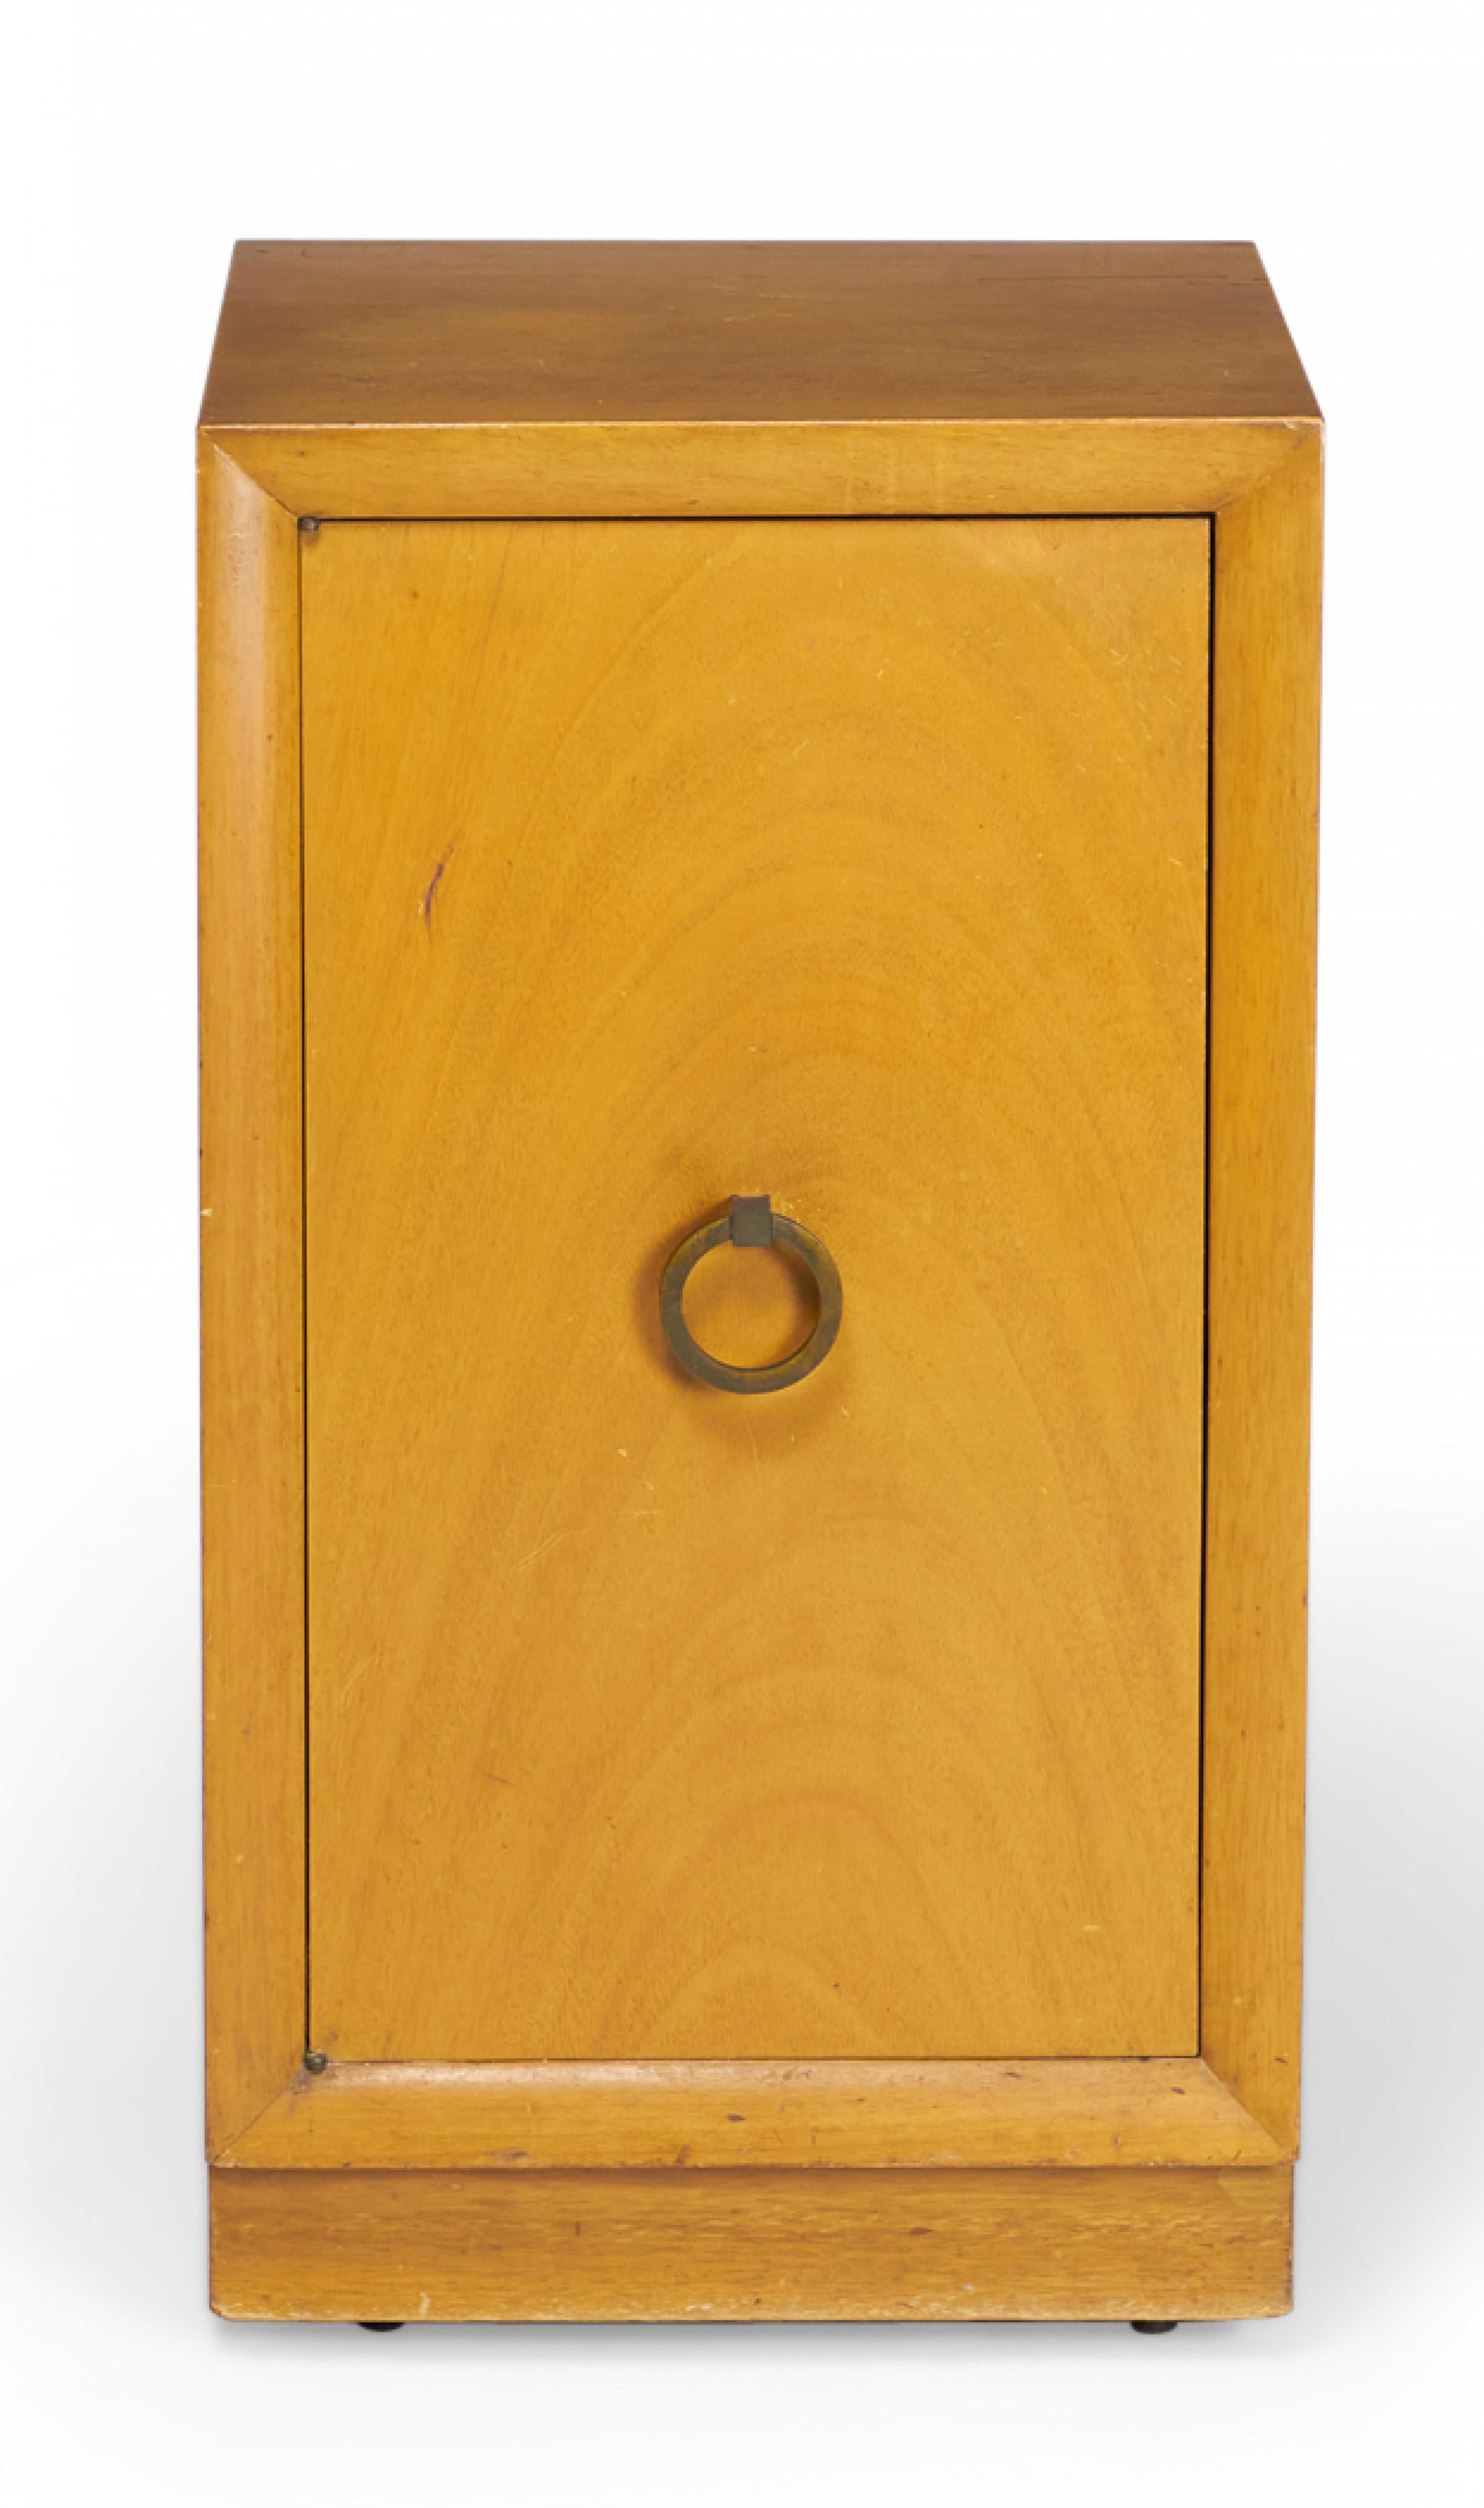 American mid-century blond maple nightstand / tall cabinet with a single compartment concealed by a hinged door with a bronze ring door pull. (WIDDICOMB MODERN)(Similar cabinets: DUF0149B, DUF0149C)
 